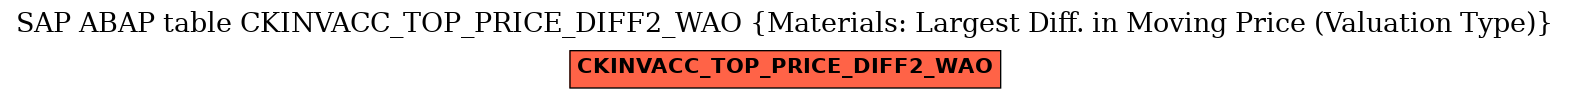 E-R Diagram for table CKINVACC_TOP_PRICE_DIFF2_WAO (Materials: Largest Diff. in Moving Price (Valuation Type))